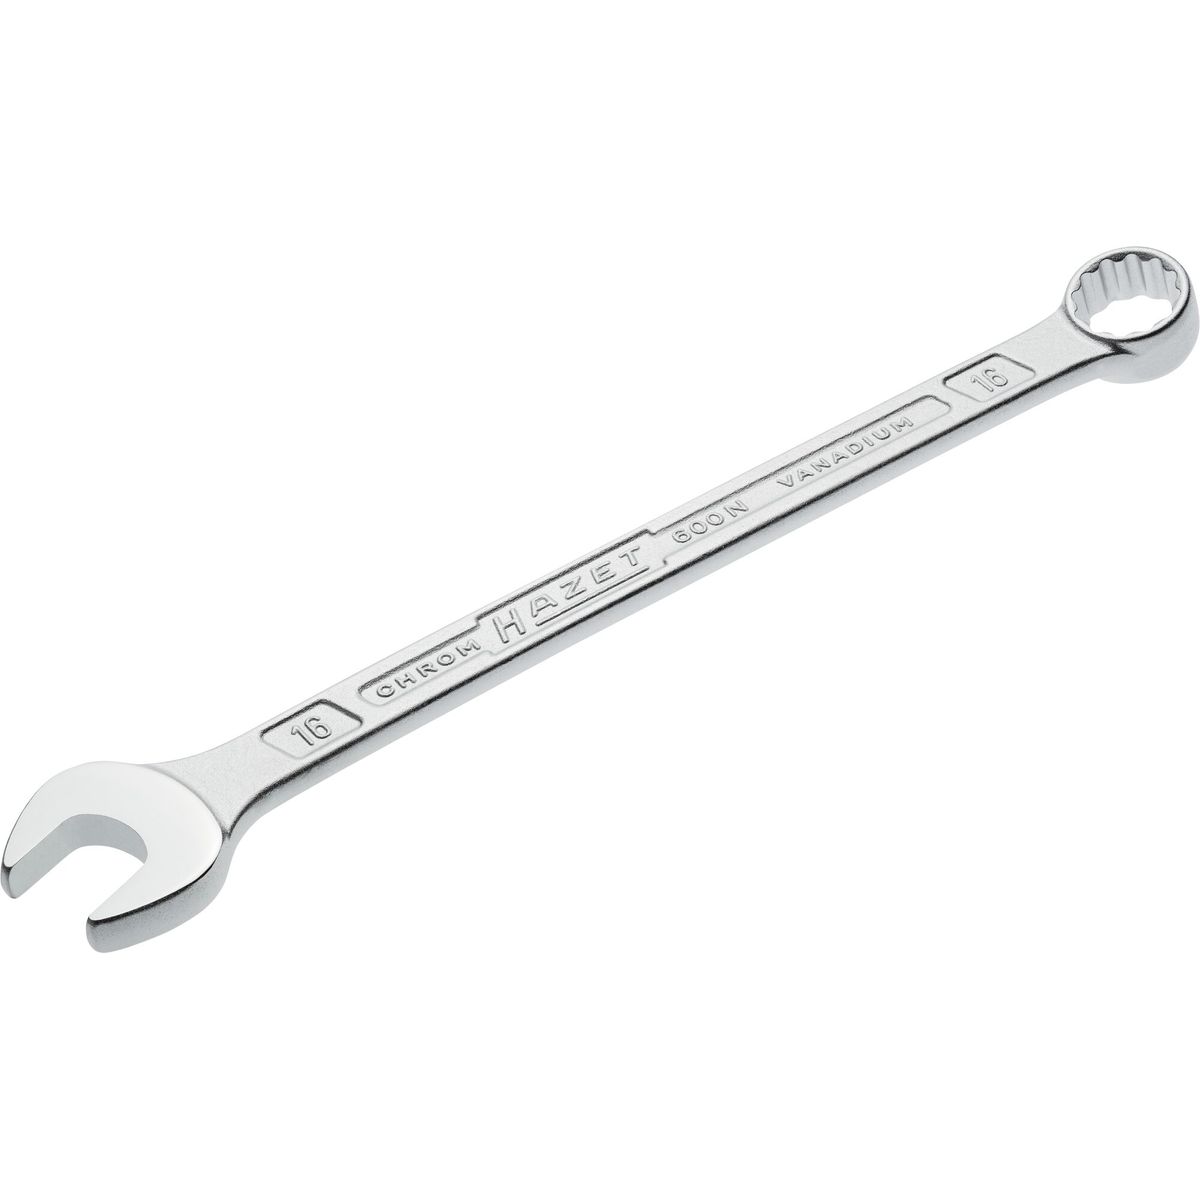 Combination Wrench No.600N-16 Hazet®